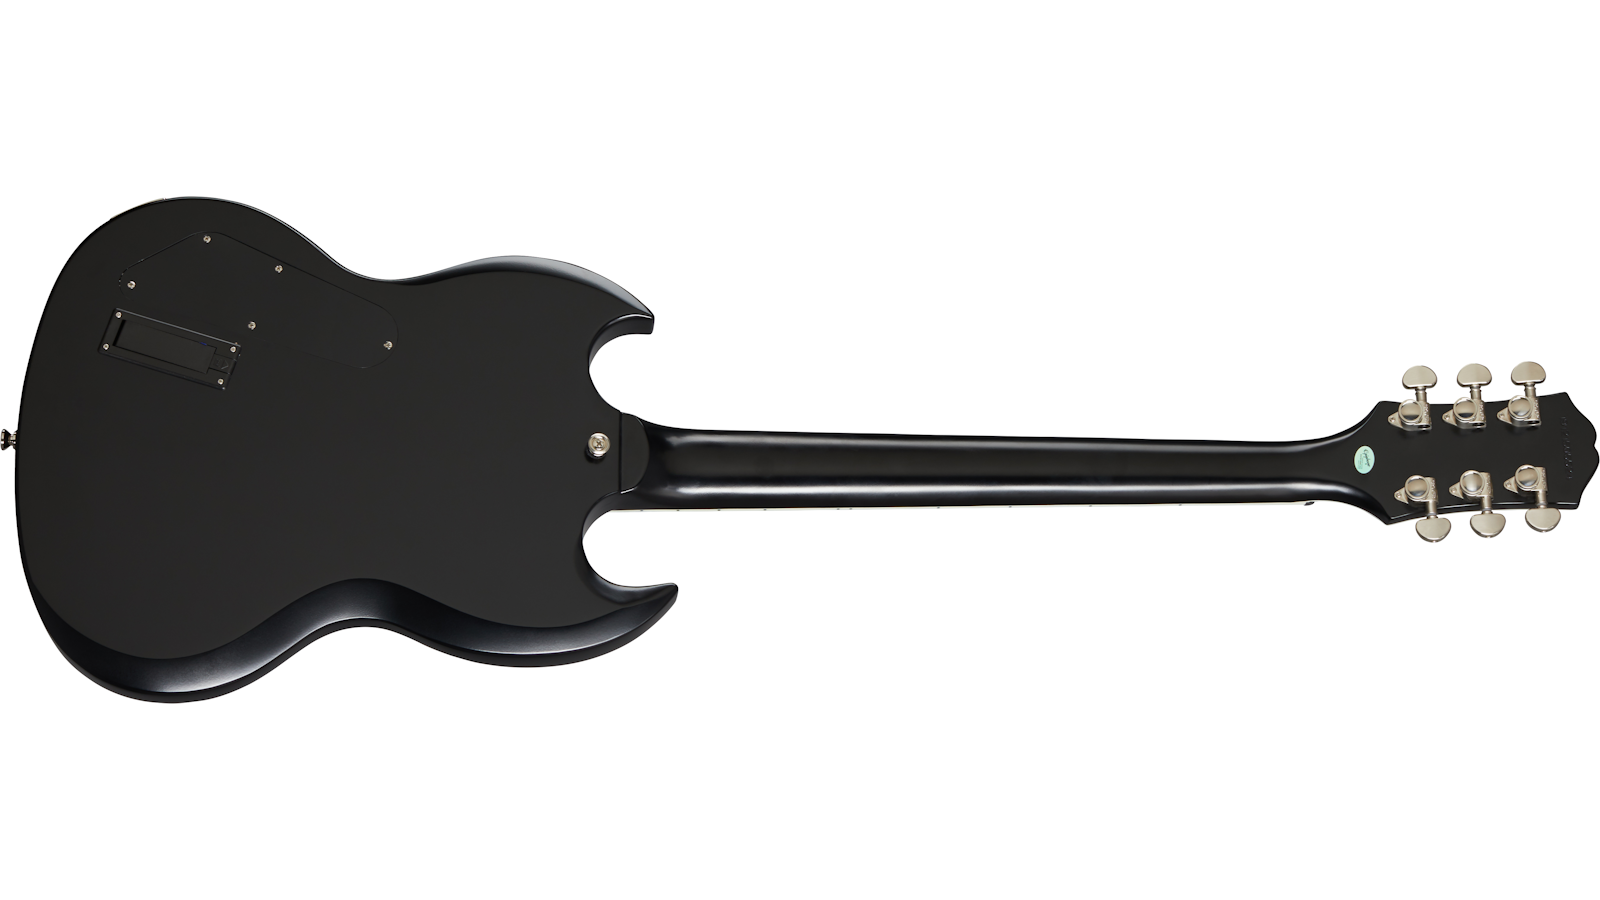 Epiphone Sg Prophecy Modern 2h Fishman Fluence Ht Eb - Black Aged - Double cut electric guitar - Variation 1